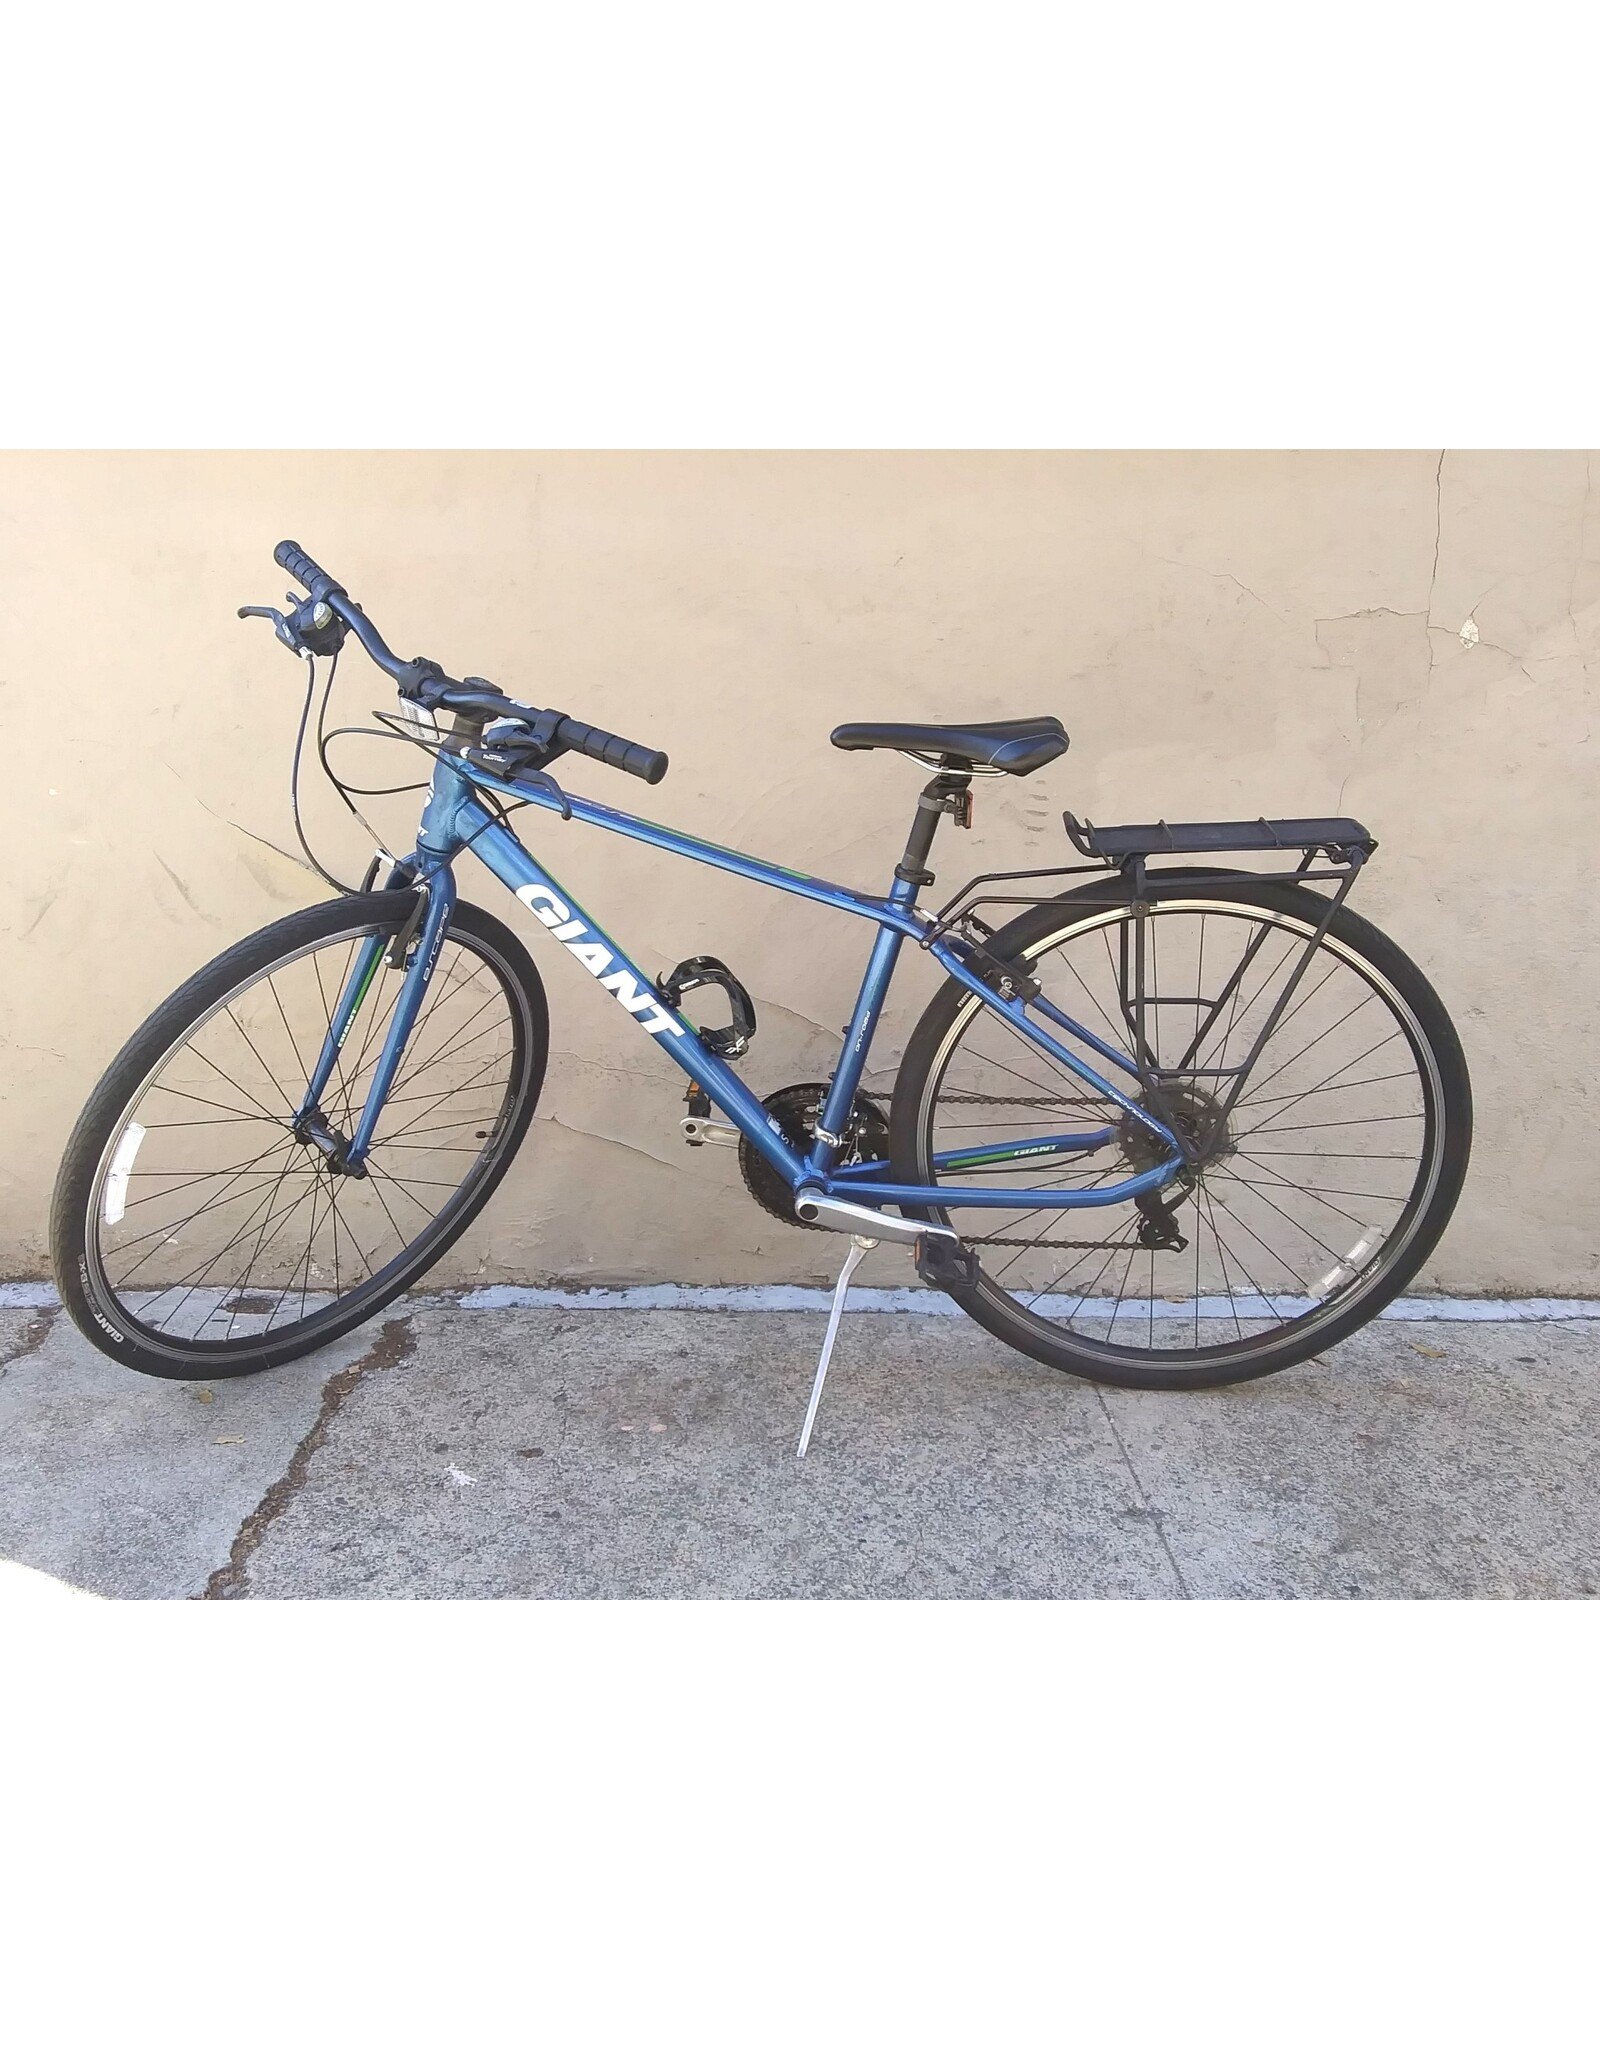 Giant Giant Escape 3 On road Sport, 2015, 17 Inches, Blue